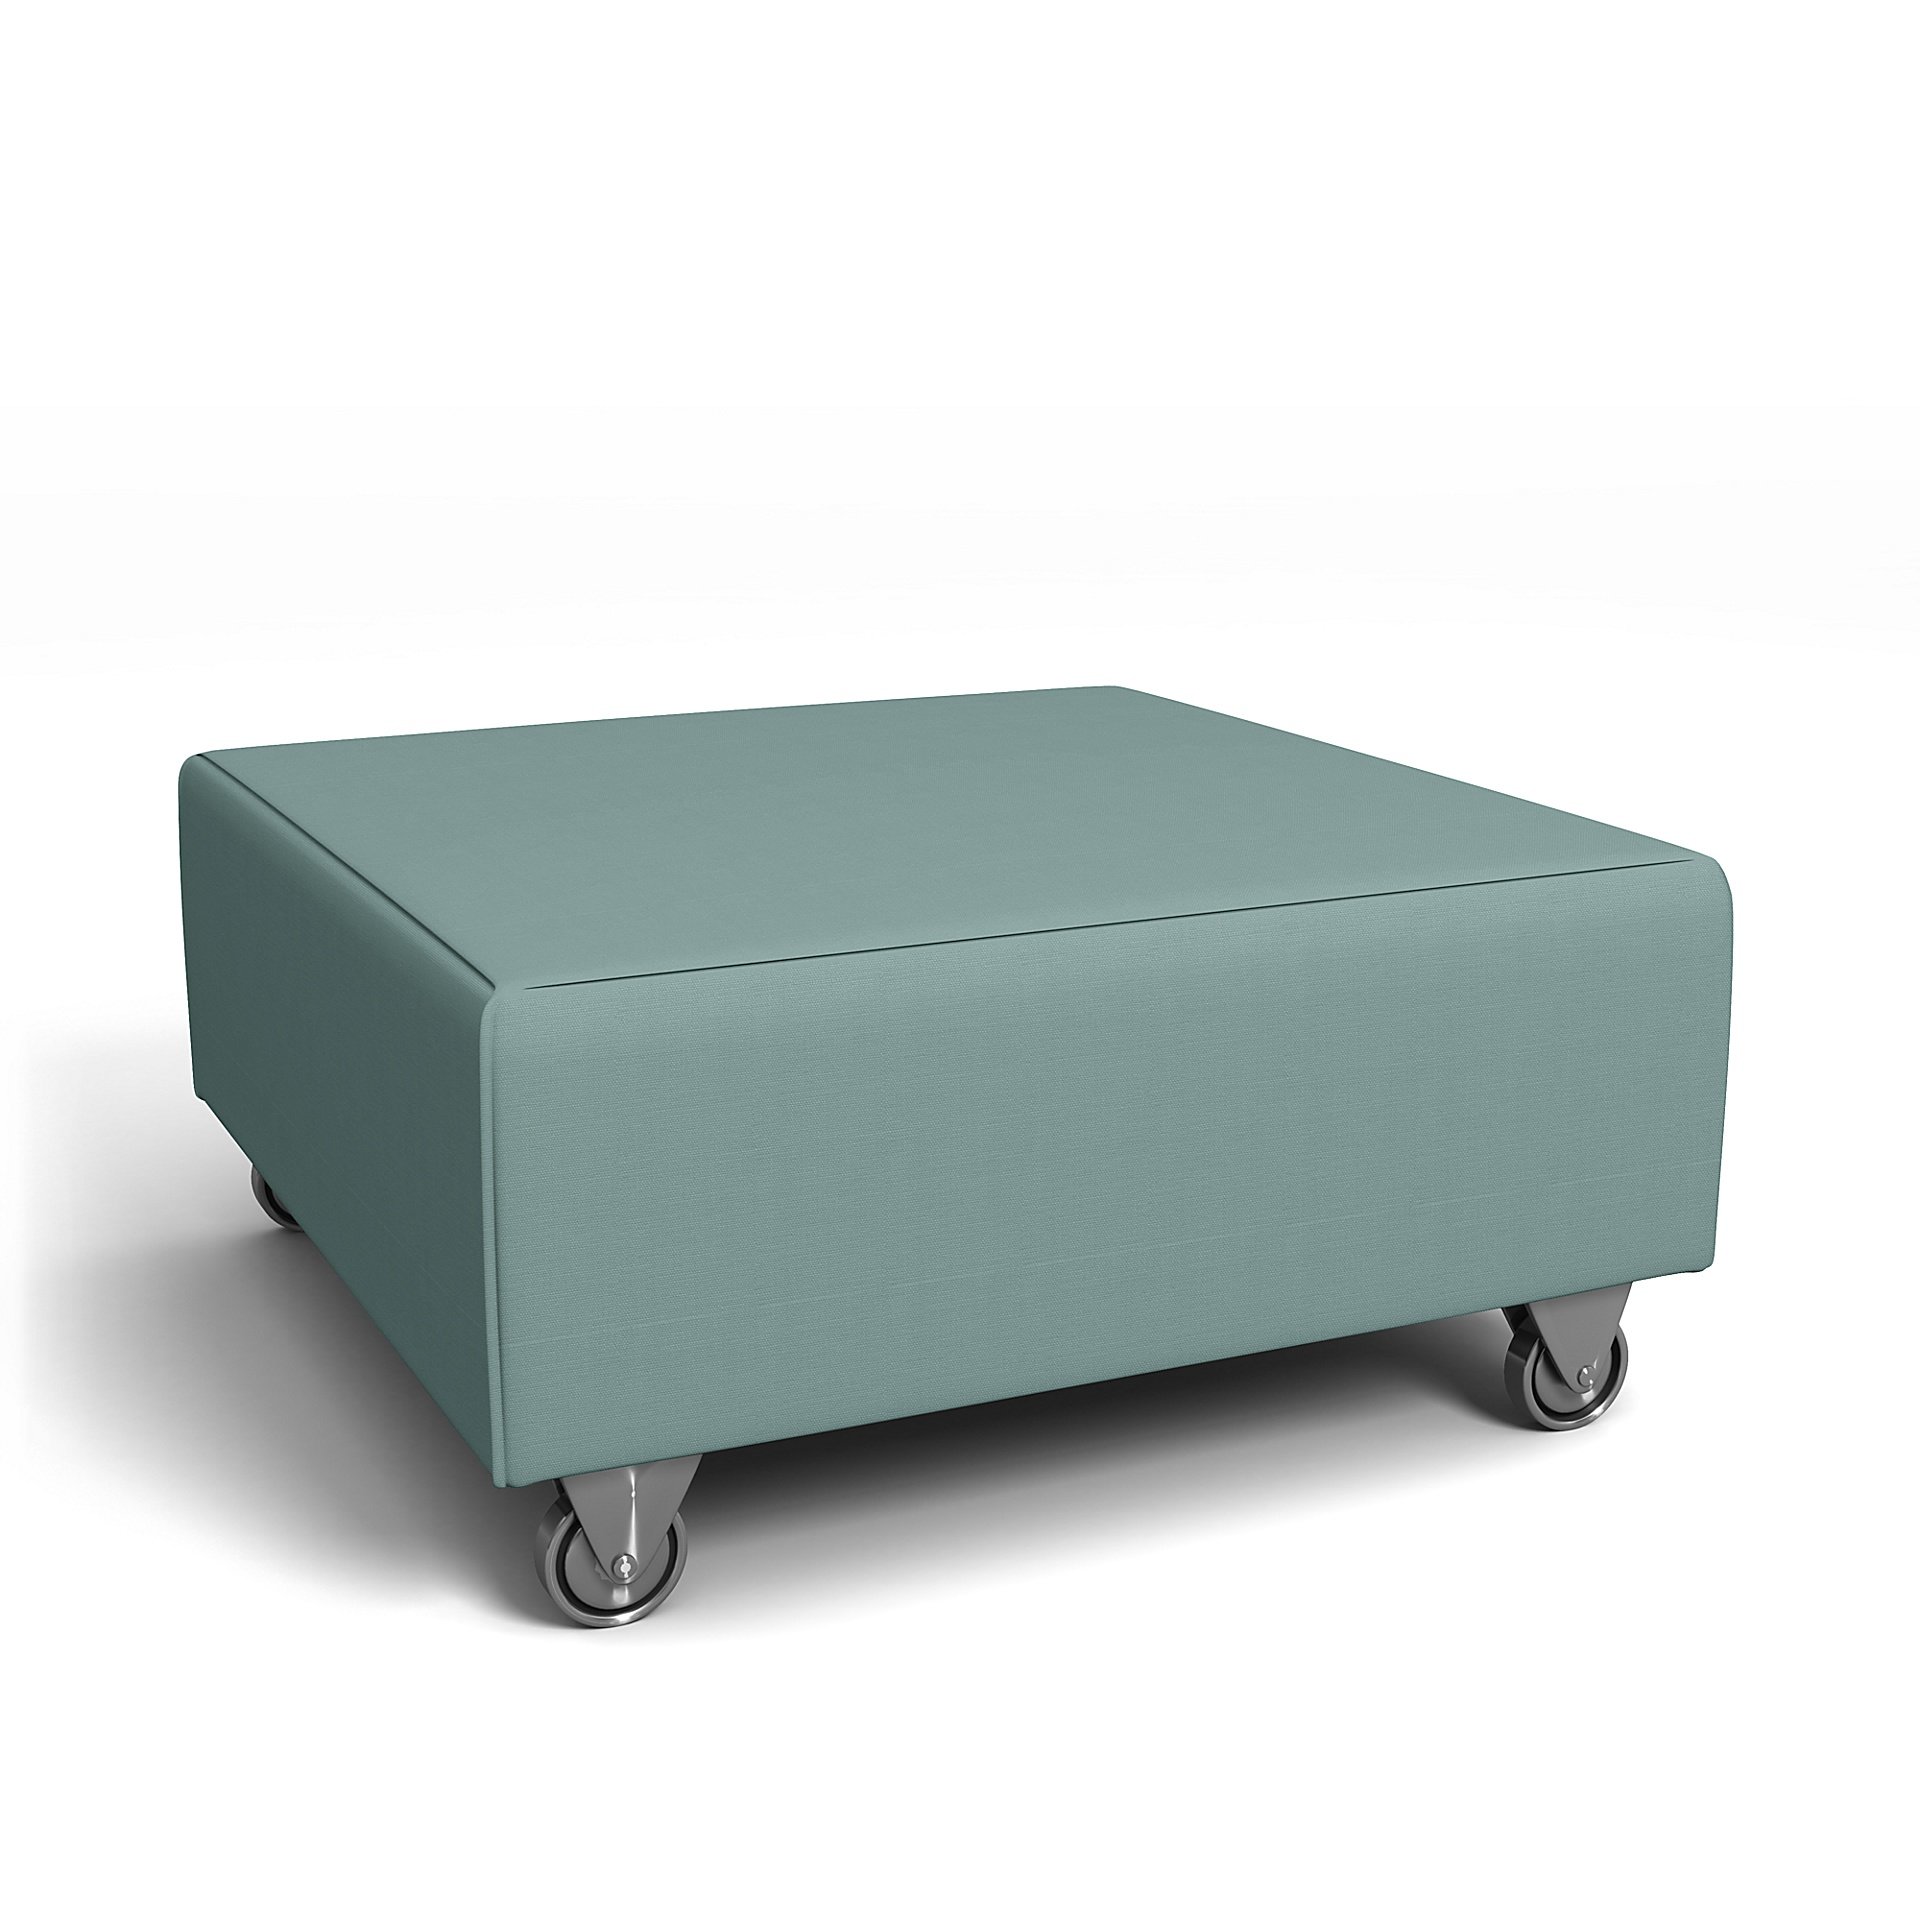 IKEA - Falsterbo Footstool Cover, Mineral Blue, Cotton - Bemz